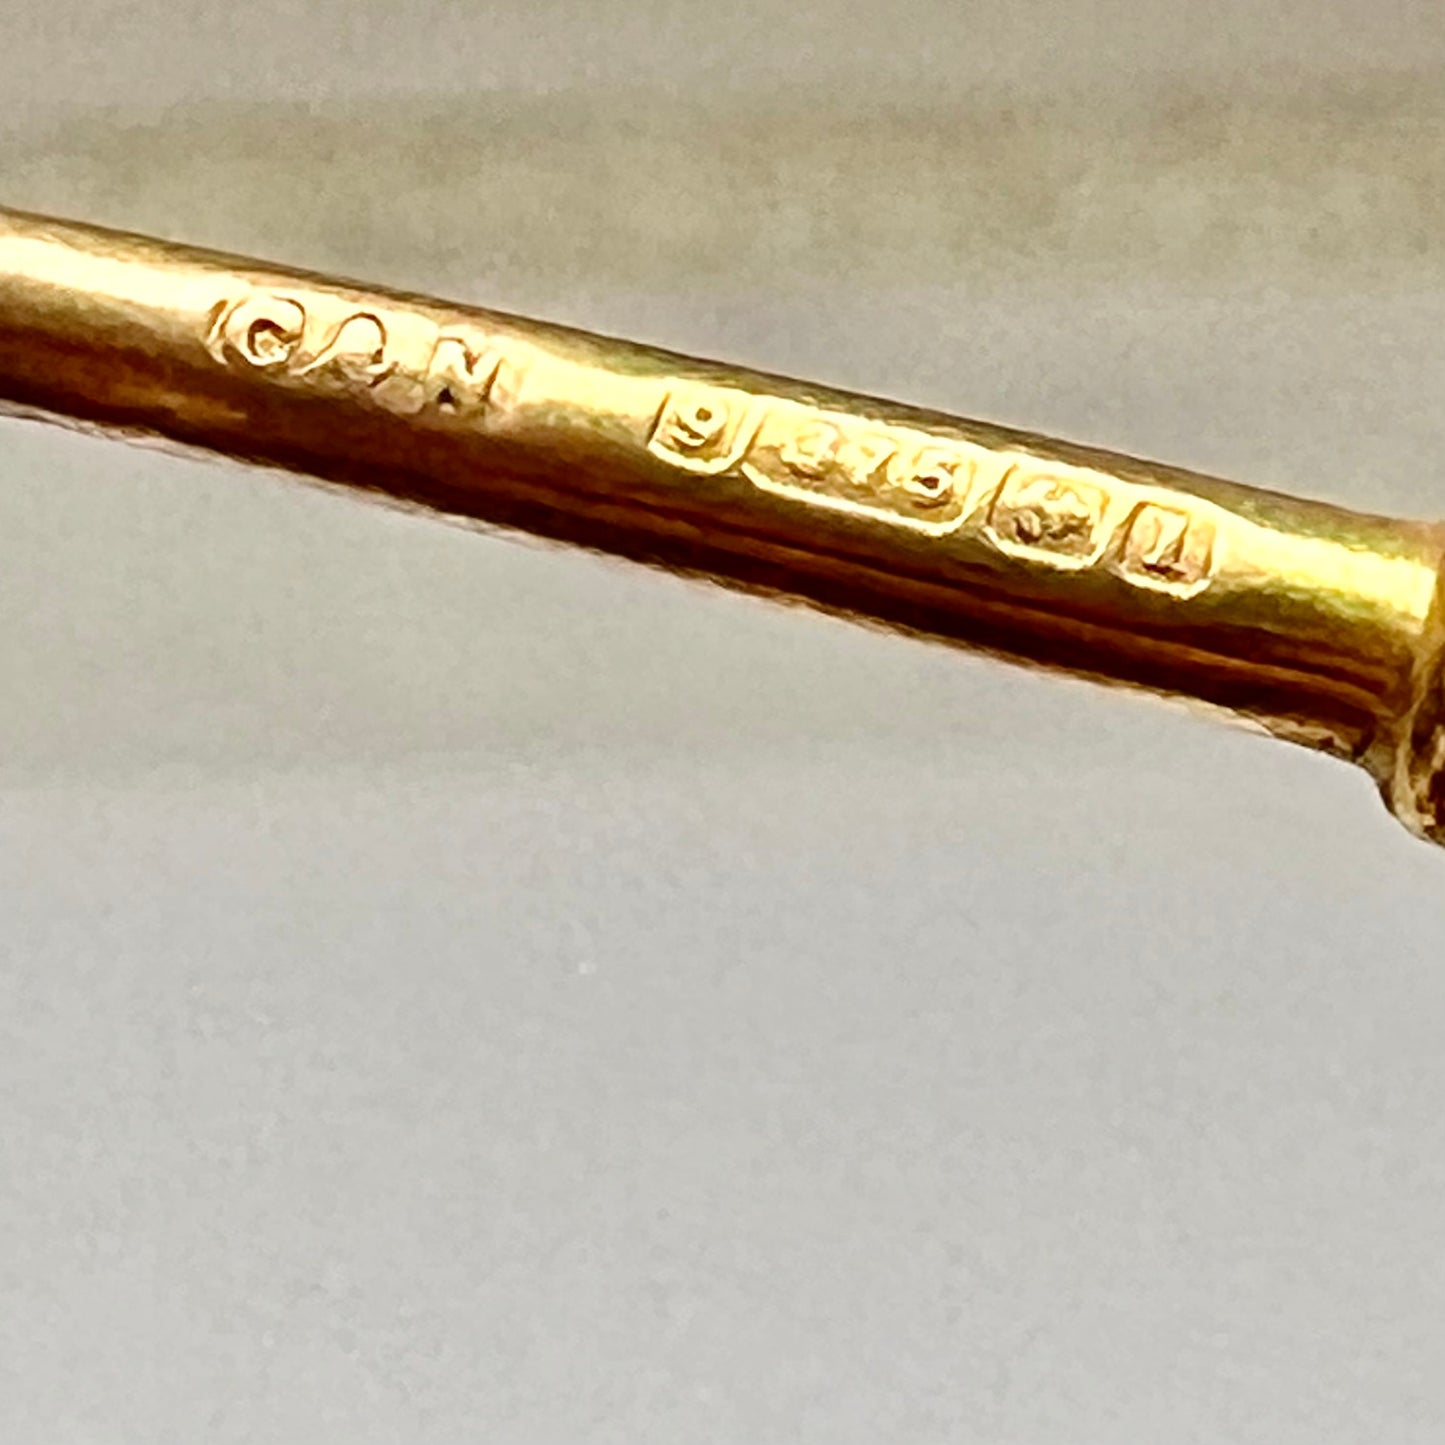 Edwardian 9ct gold button hook, with marks for Birmingham 1910, Chrisford and Norris